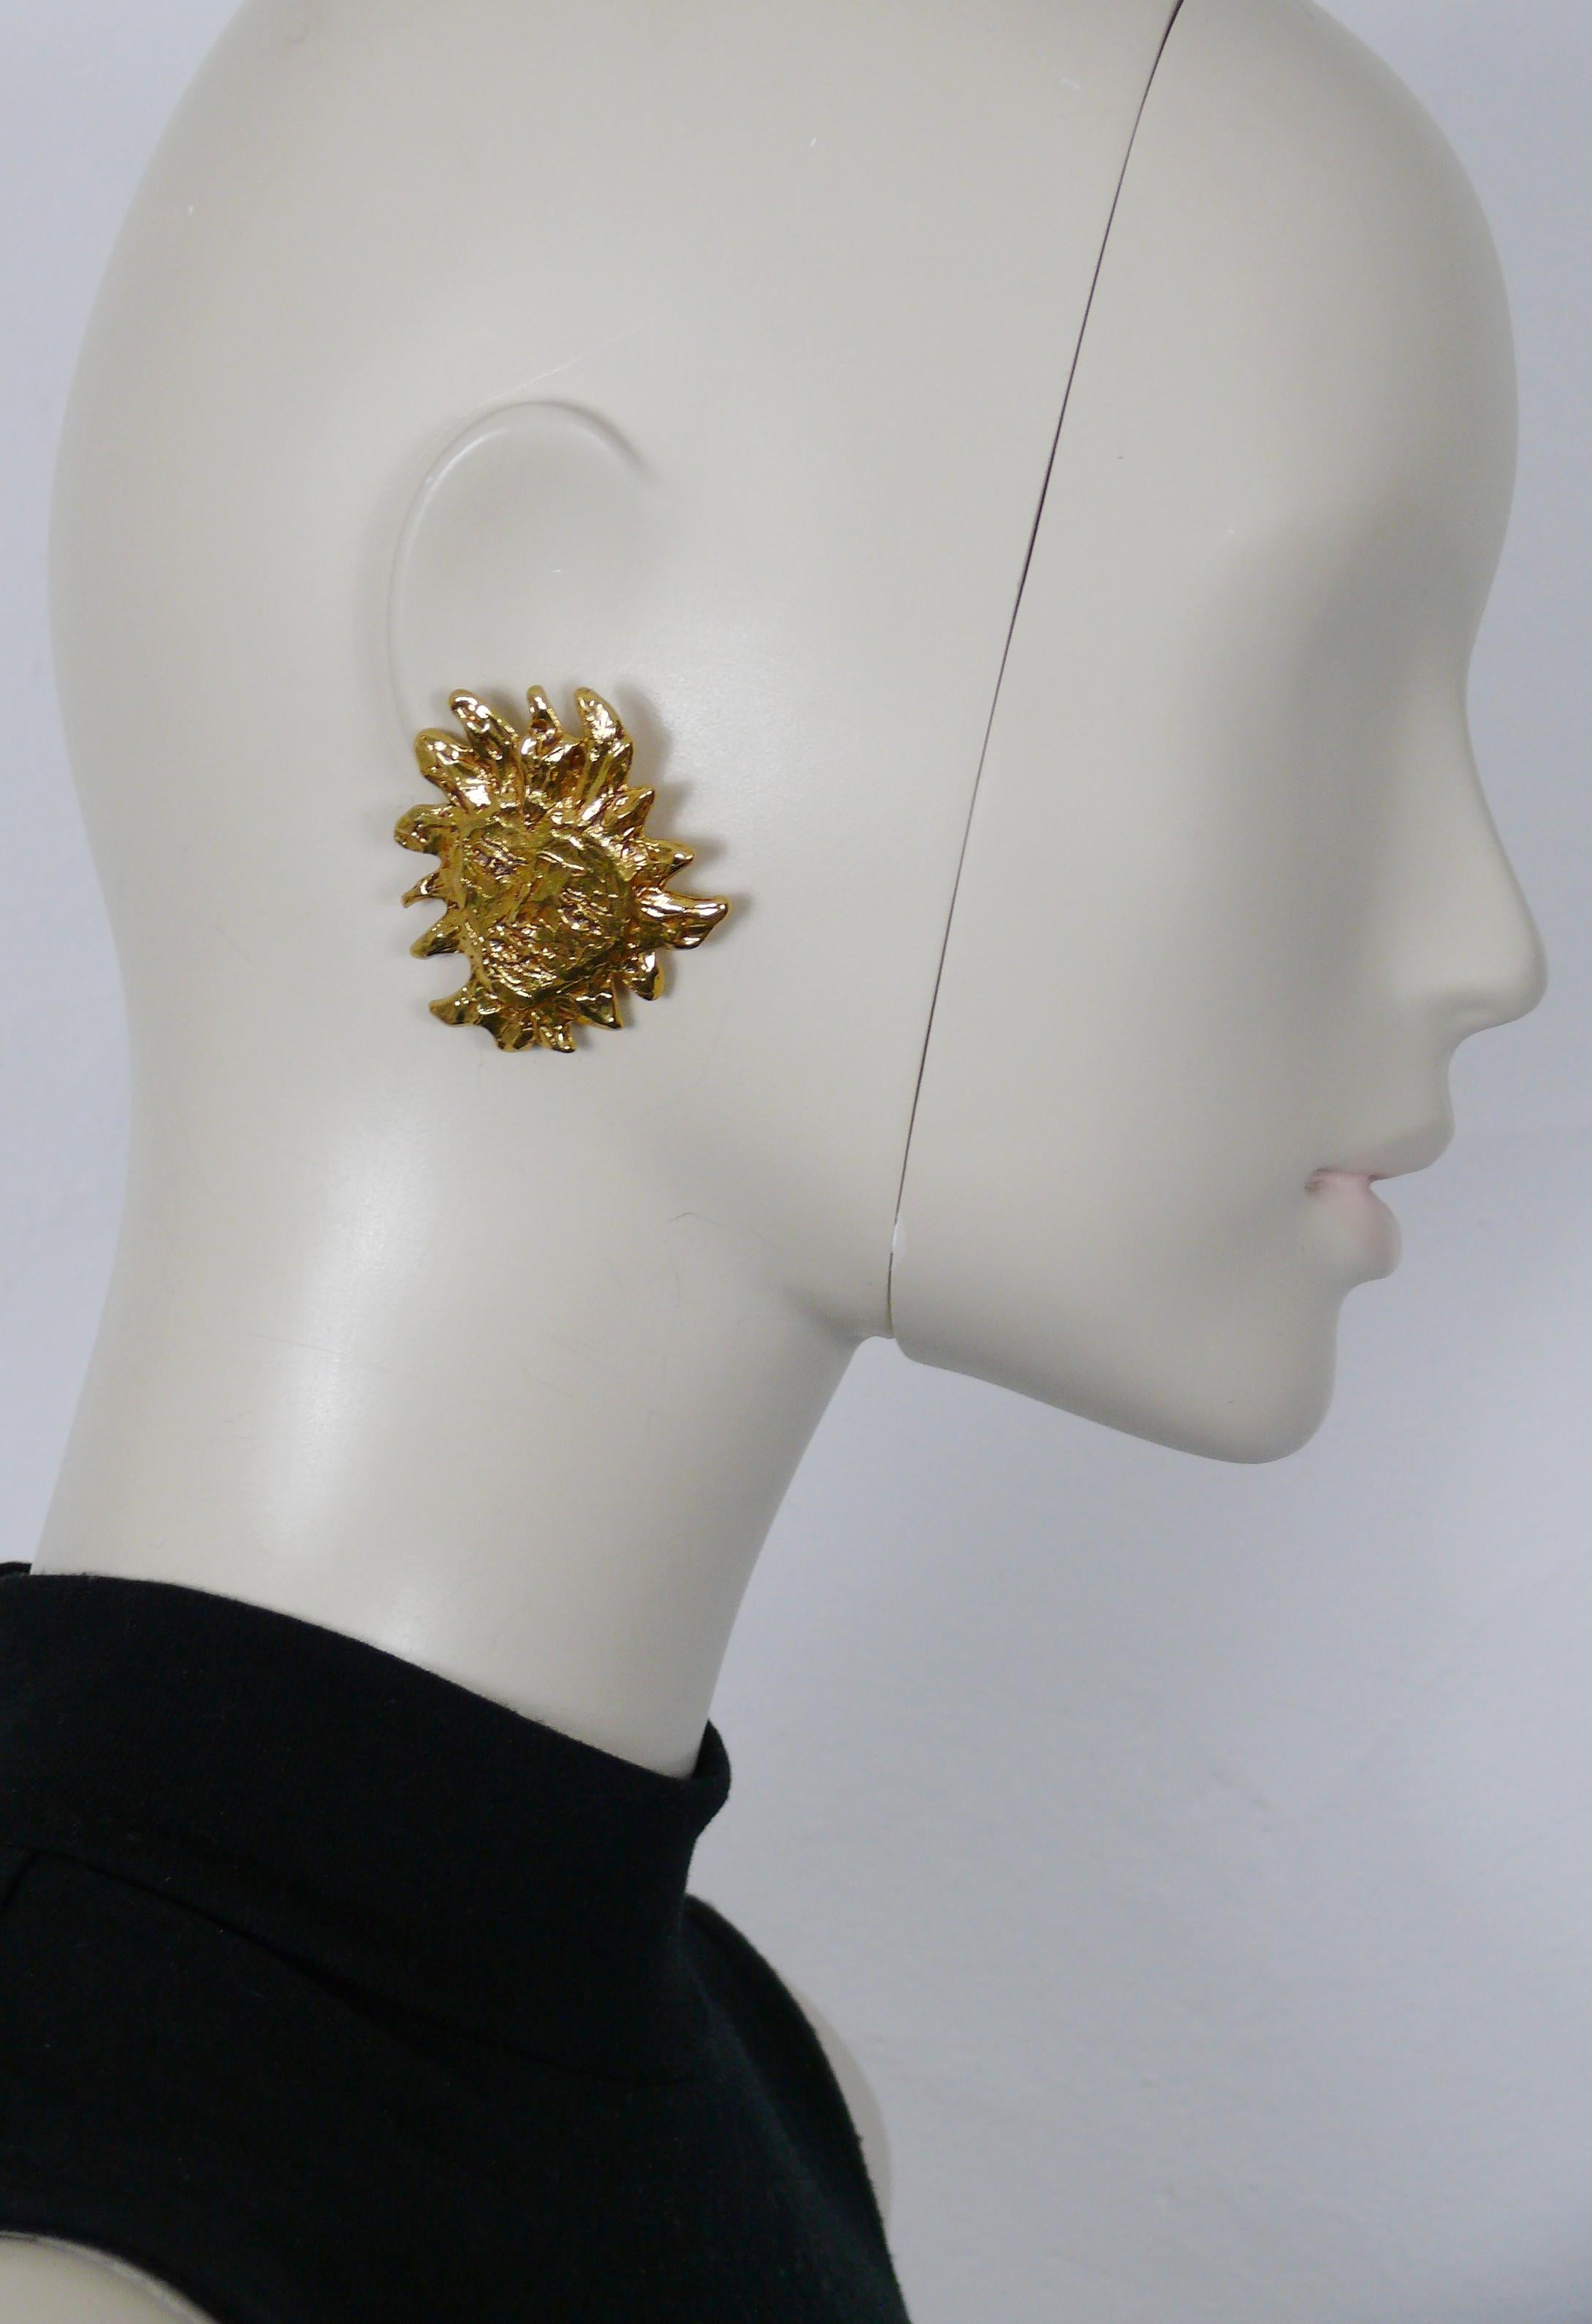 YVES SAINT LAURENT by ROBERT GOOSSENS vintage textured and antiqued gold toned sun face clip-on earrings.

Embossed YSL Made in France.

Indicative measurements : height approx. 4.8 cm (1.89 inches) / max. width approx. 4.2 cm (1.65 inches).

Weight